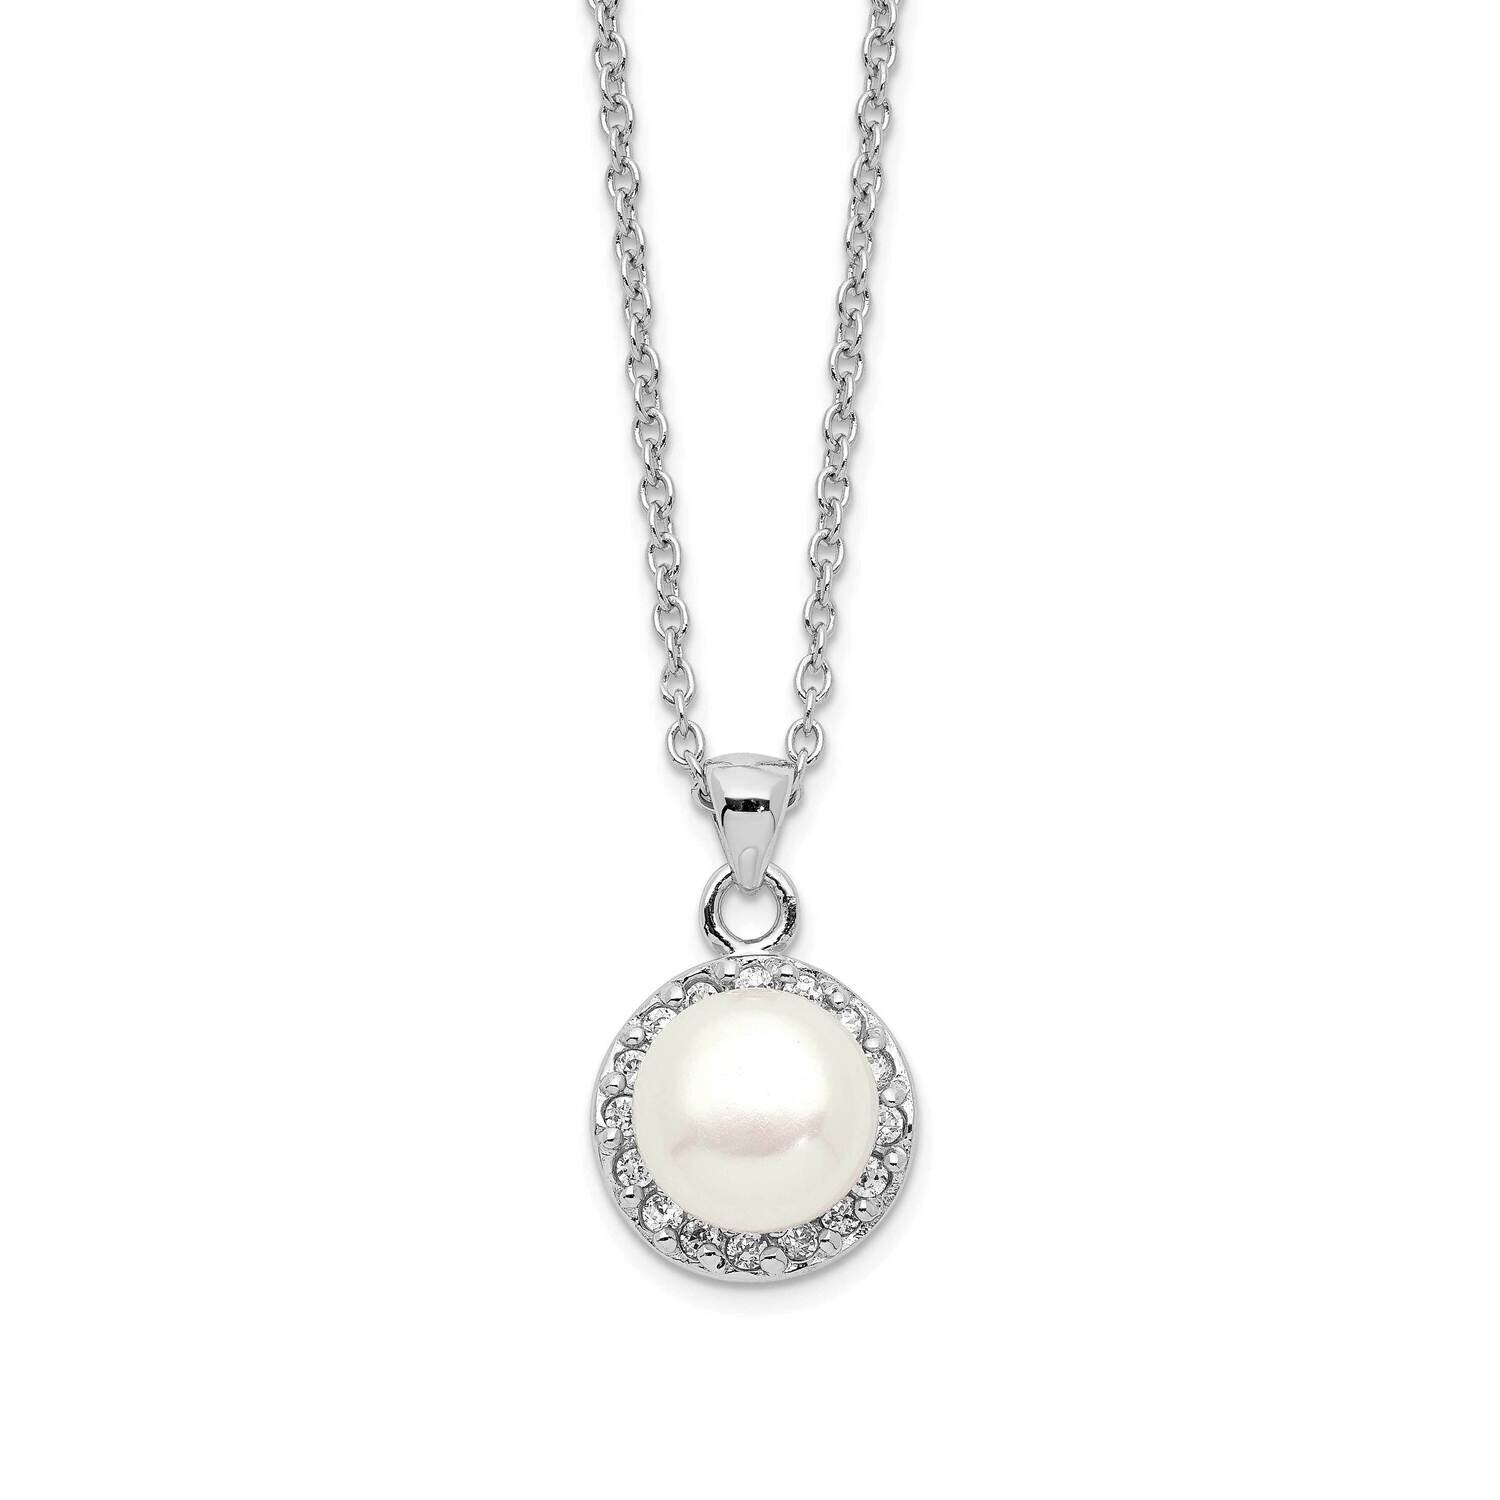 7-8mm White Button Fwc Pearl Cz Necklace Sterling Silver Rhodium-plated QH5505-17